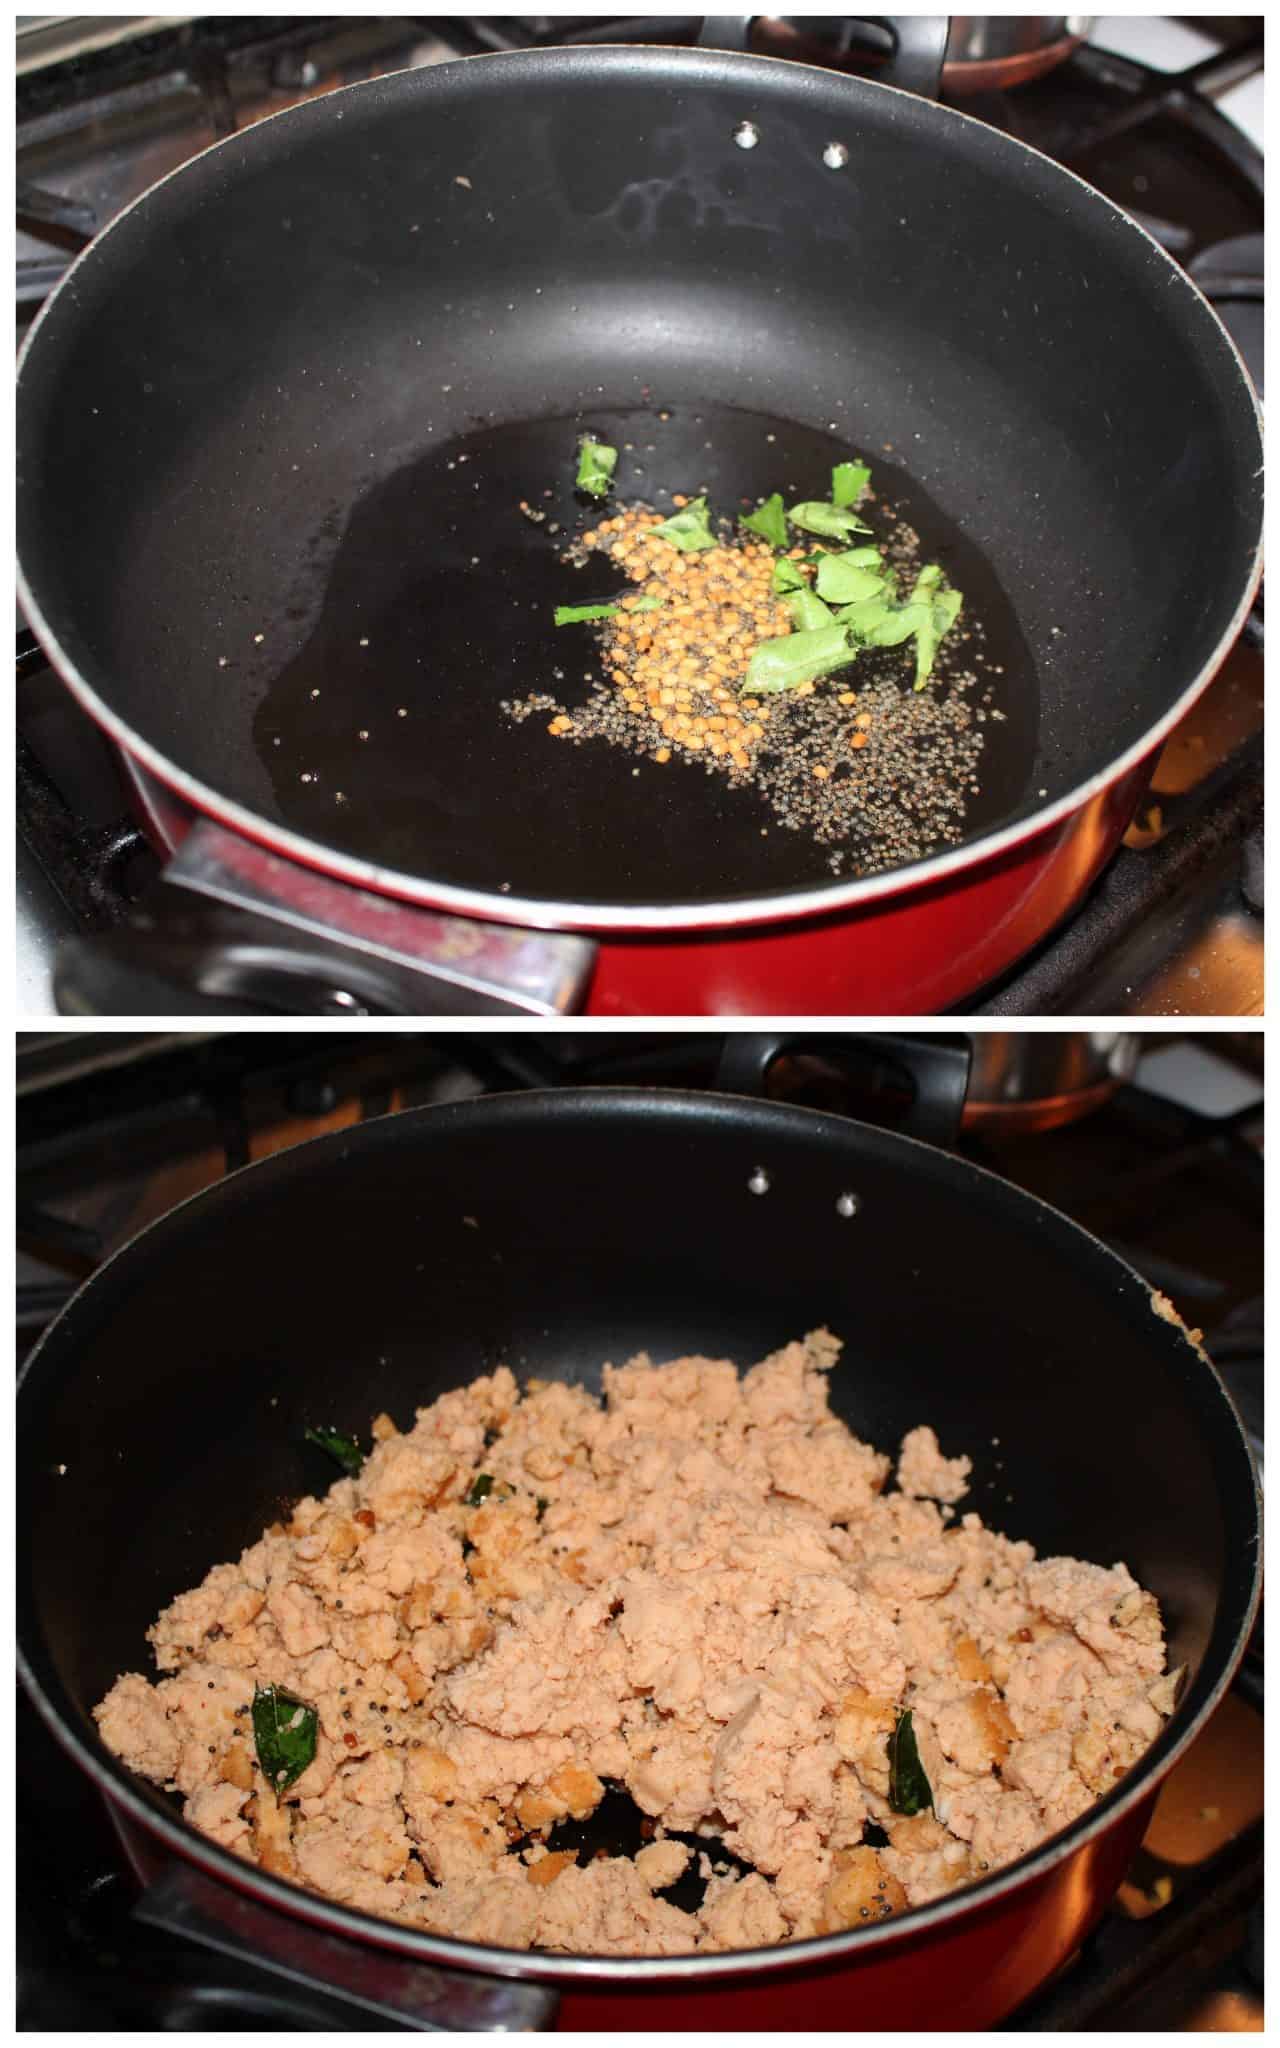 Cooking the Ingredients in a Pan